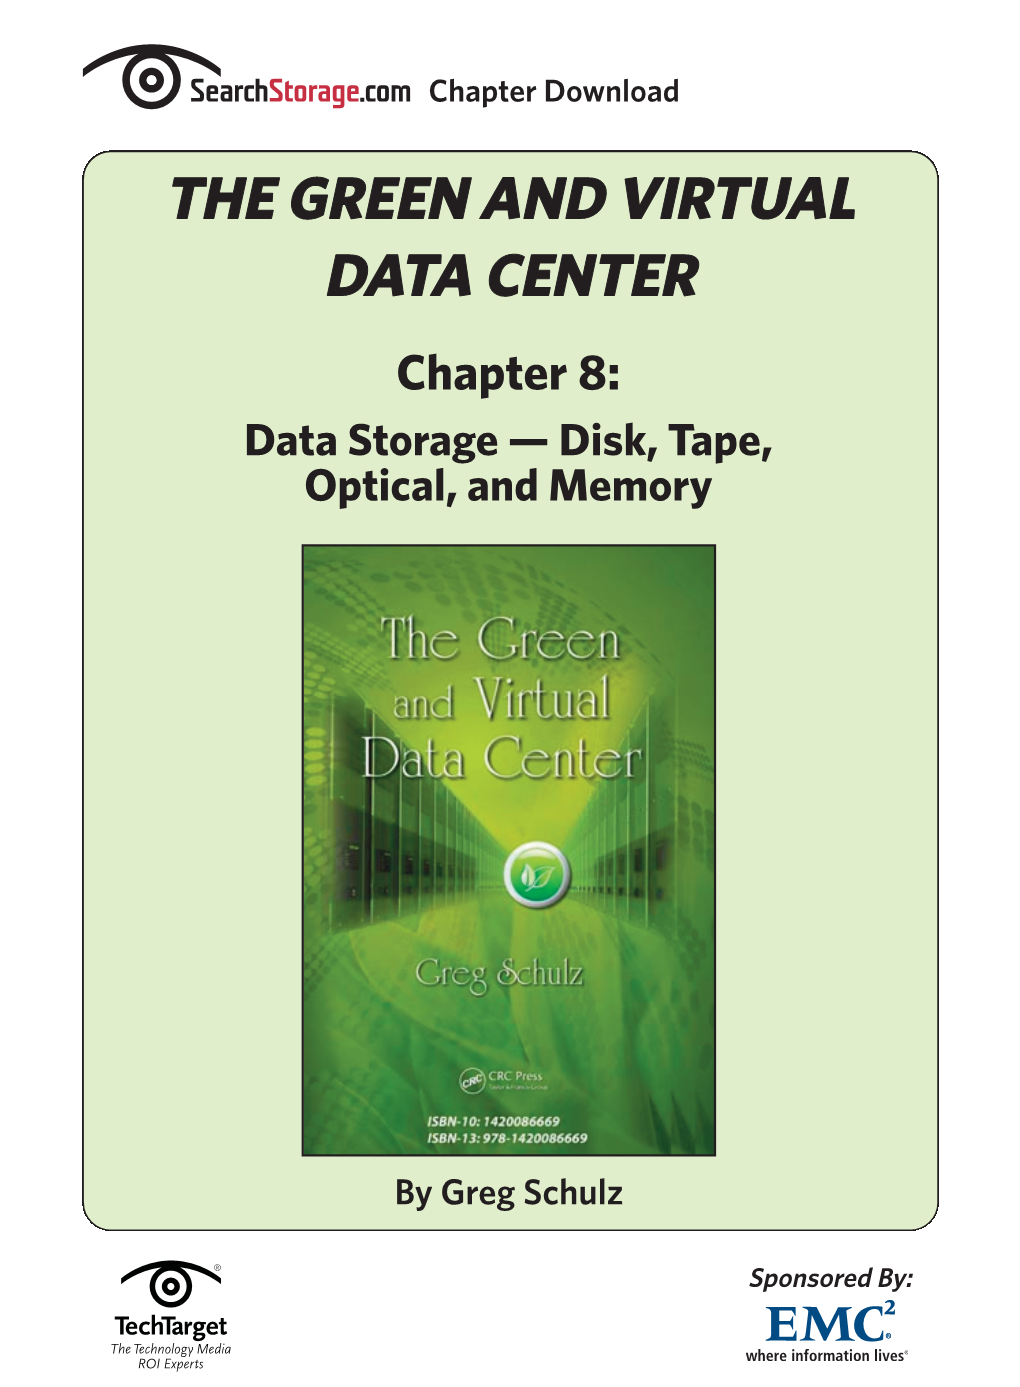 THE GREEN and VIRTUAL DATA CENTER Chapter 8: Data Storage — Disk, Tape, Optical, and Memory